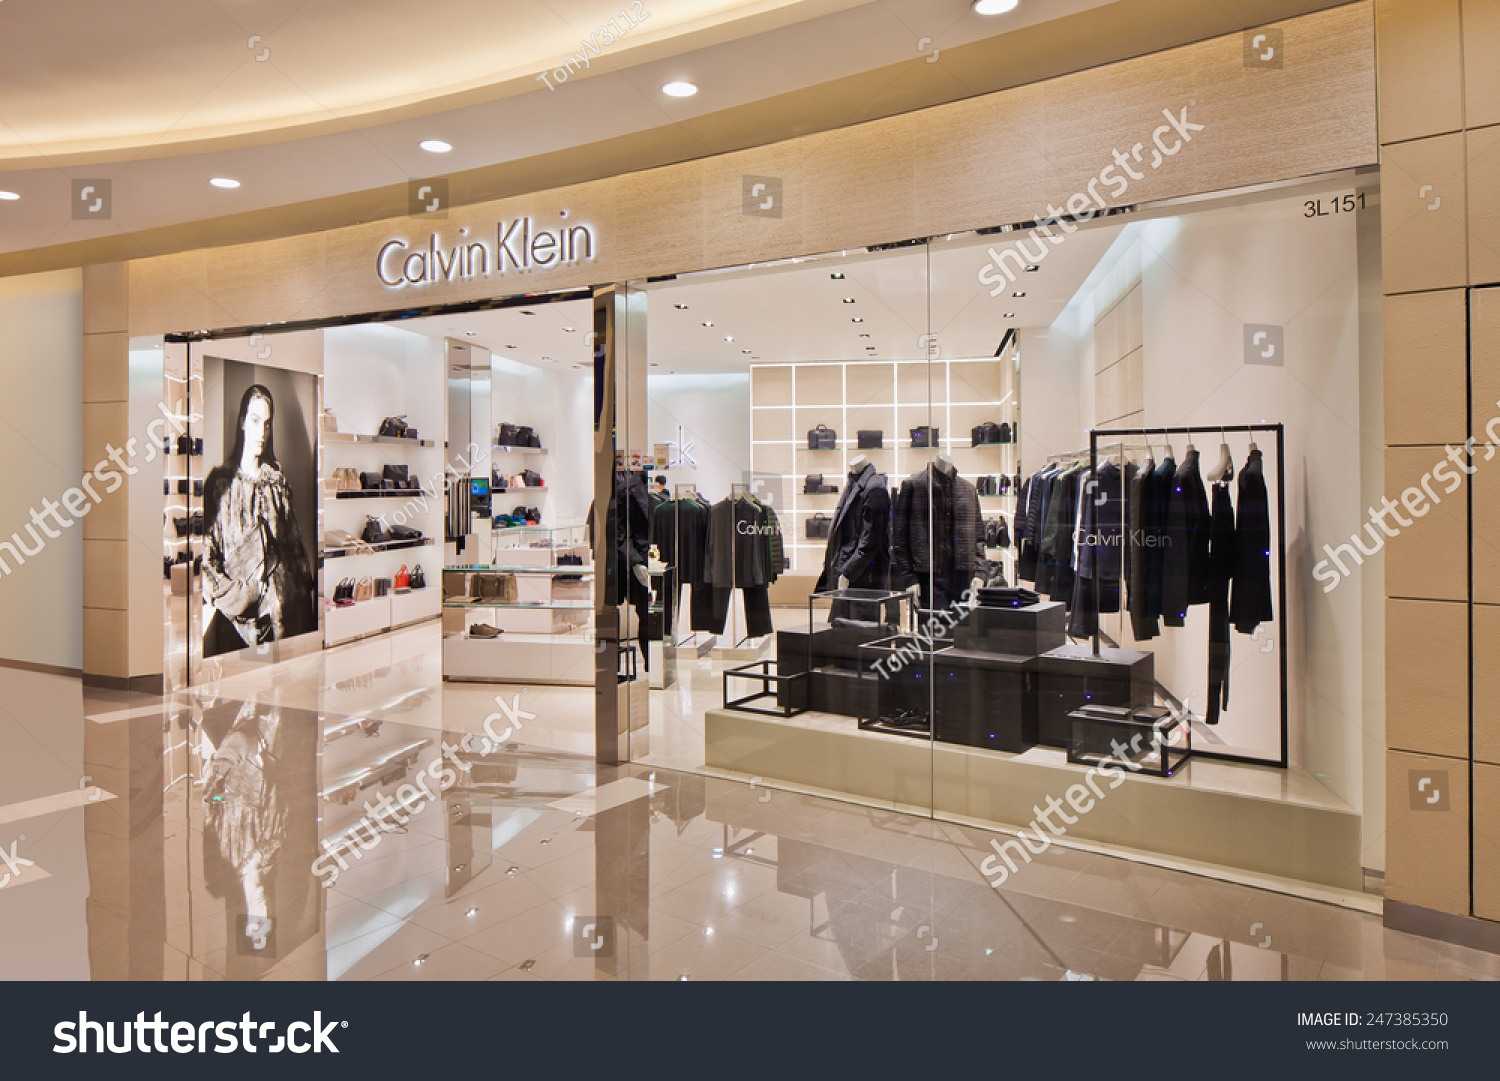 Shanghai-Dec. 8, 2014. Calvin Klein Outlet. China Expect To Be The ...